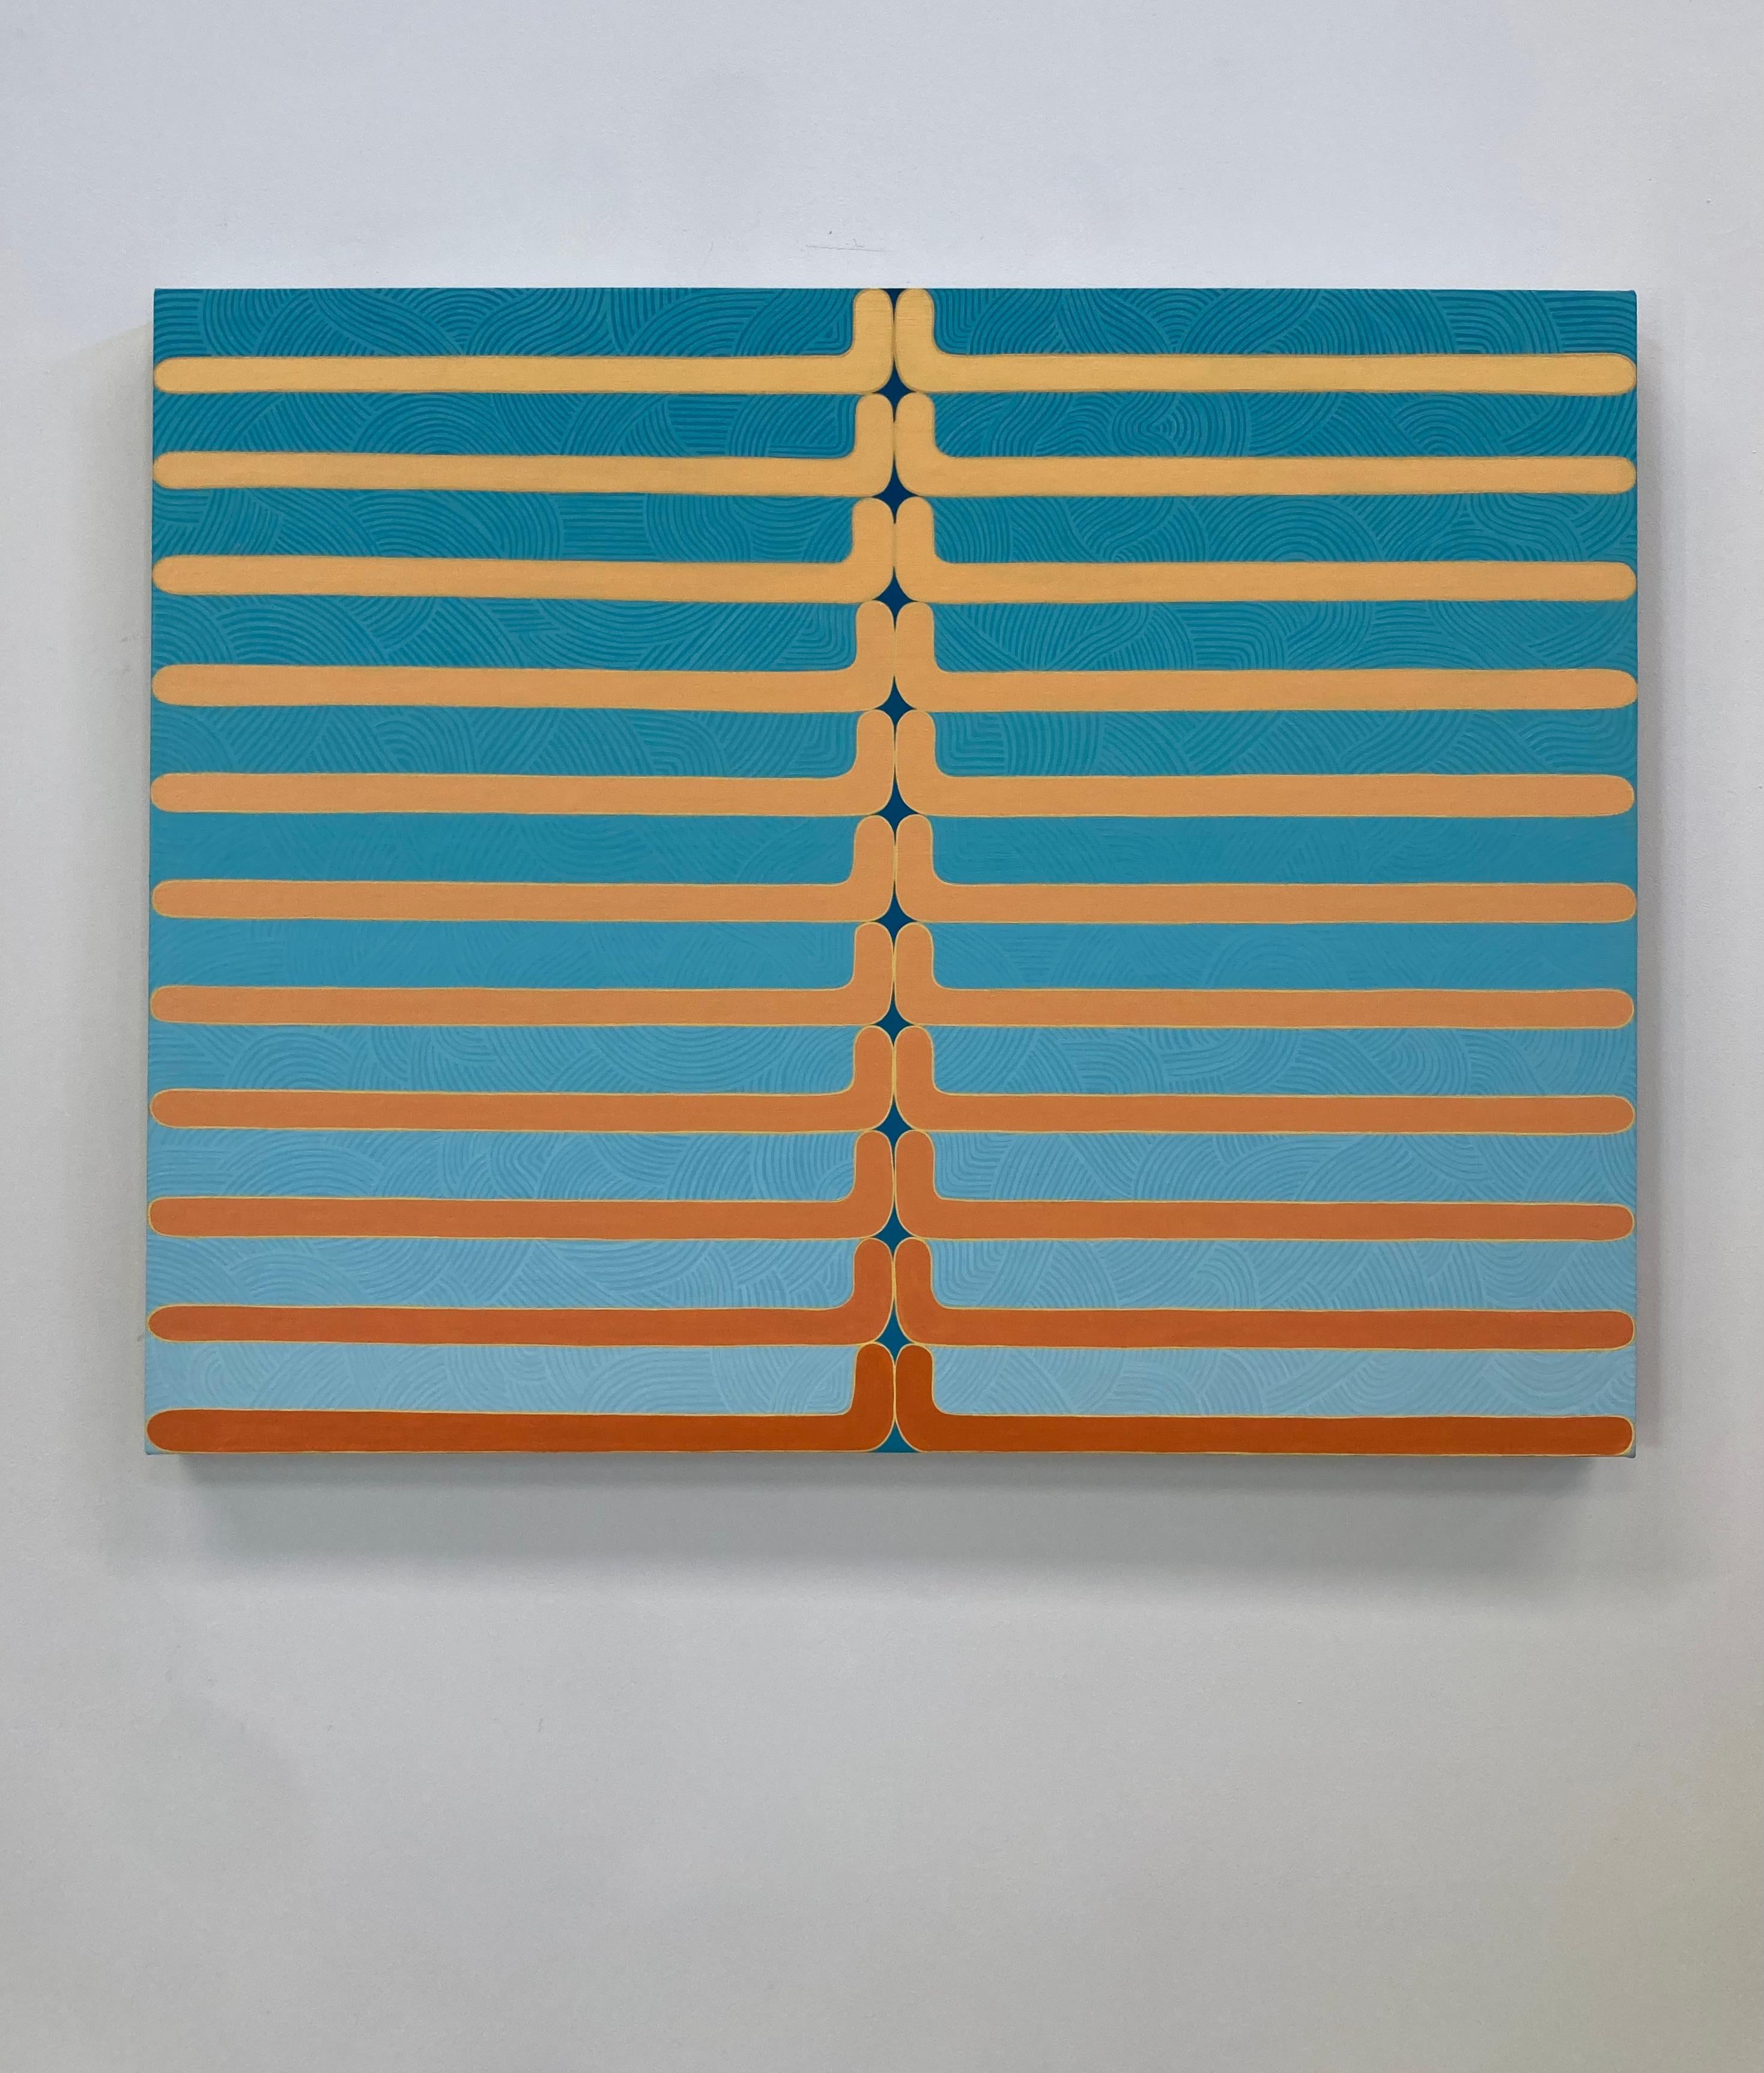 Geometric shapes compose a symmetrical pattern of curving horizontal stripes with edges rounded upward in the center in luminous, gradient shades of golden orange, coral and red orange, bright and luminous against a teal blue background with an